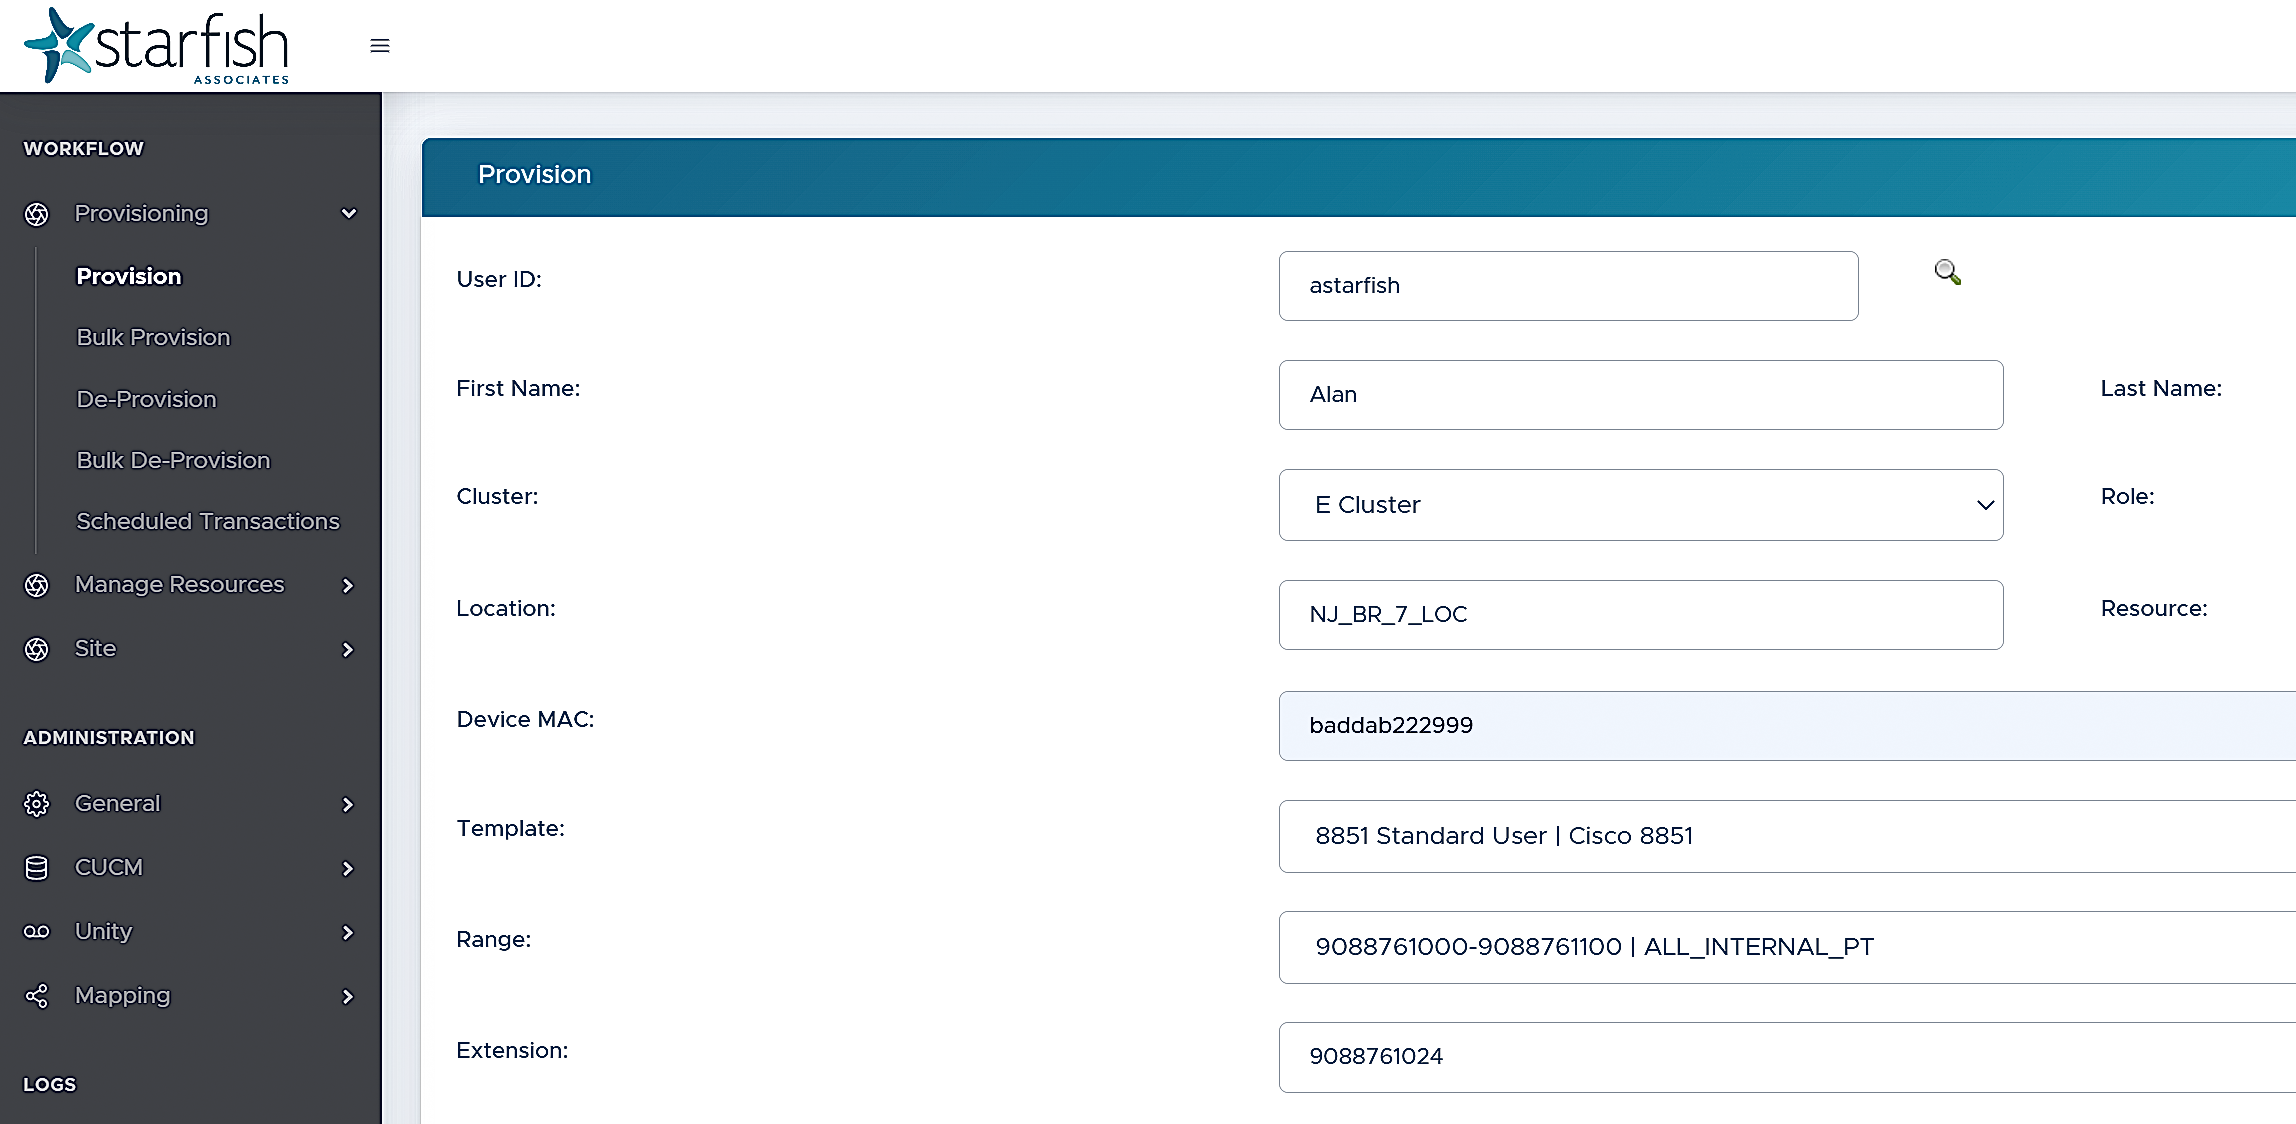 UI for Starfish Provisioning Manager for Cisco, showing how system administrators can easily provision users. The tab "Provision" is displayed on the left, beneath the Provisioning header.